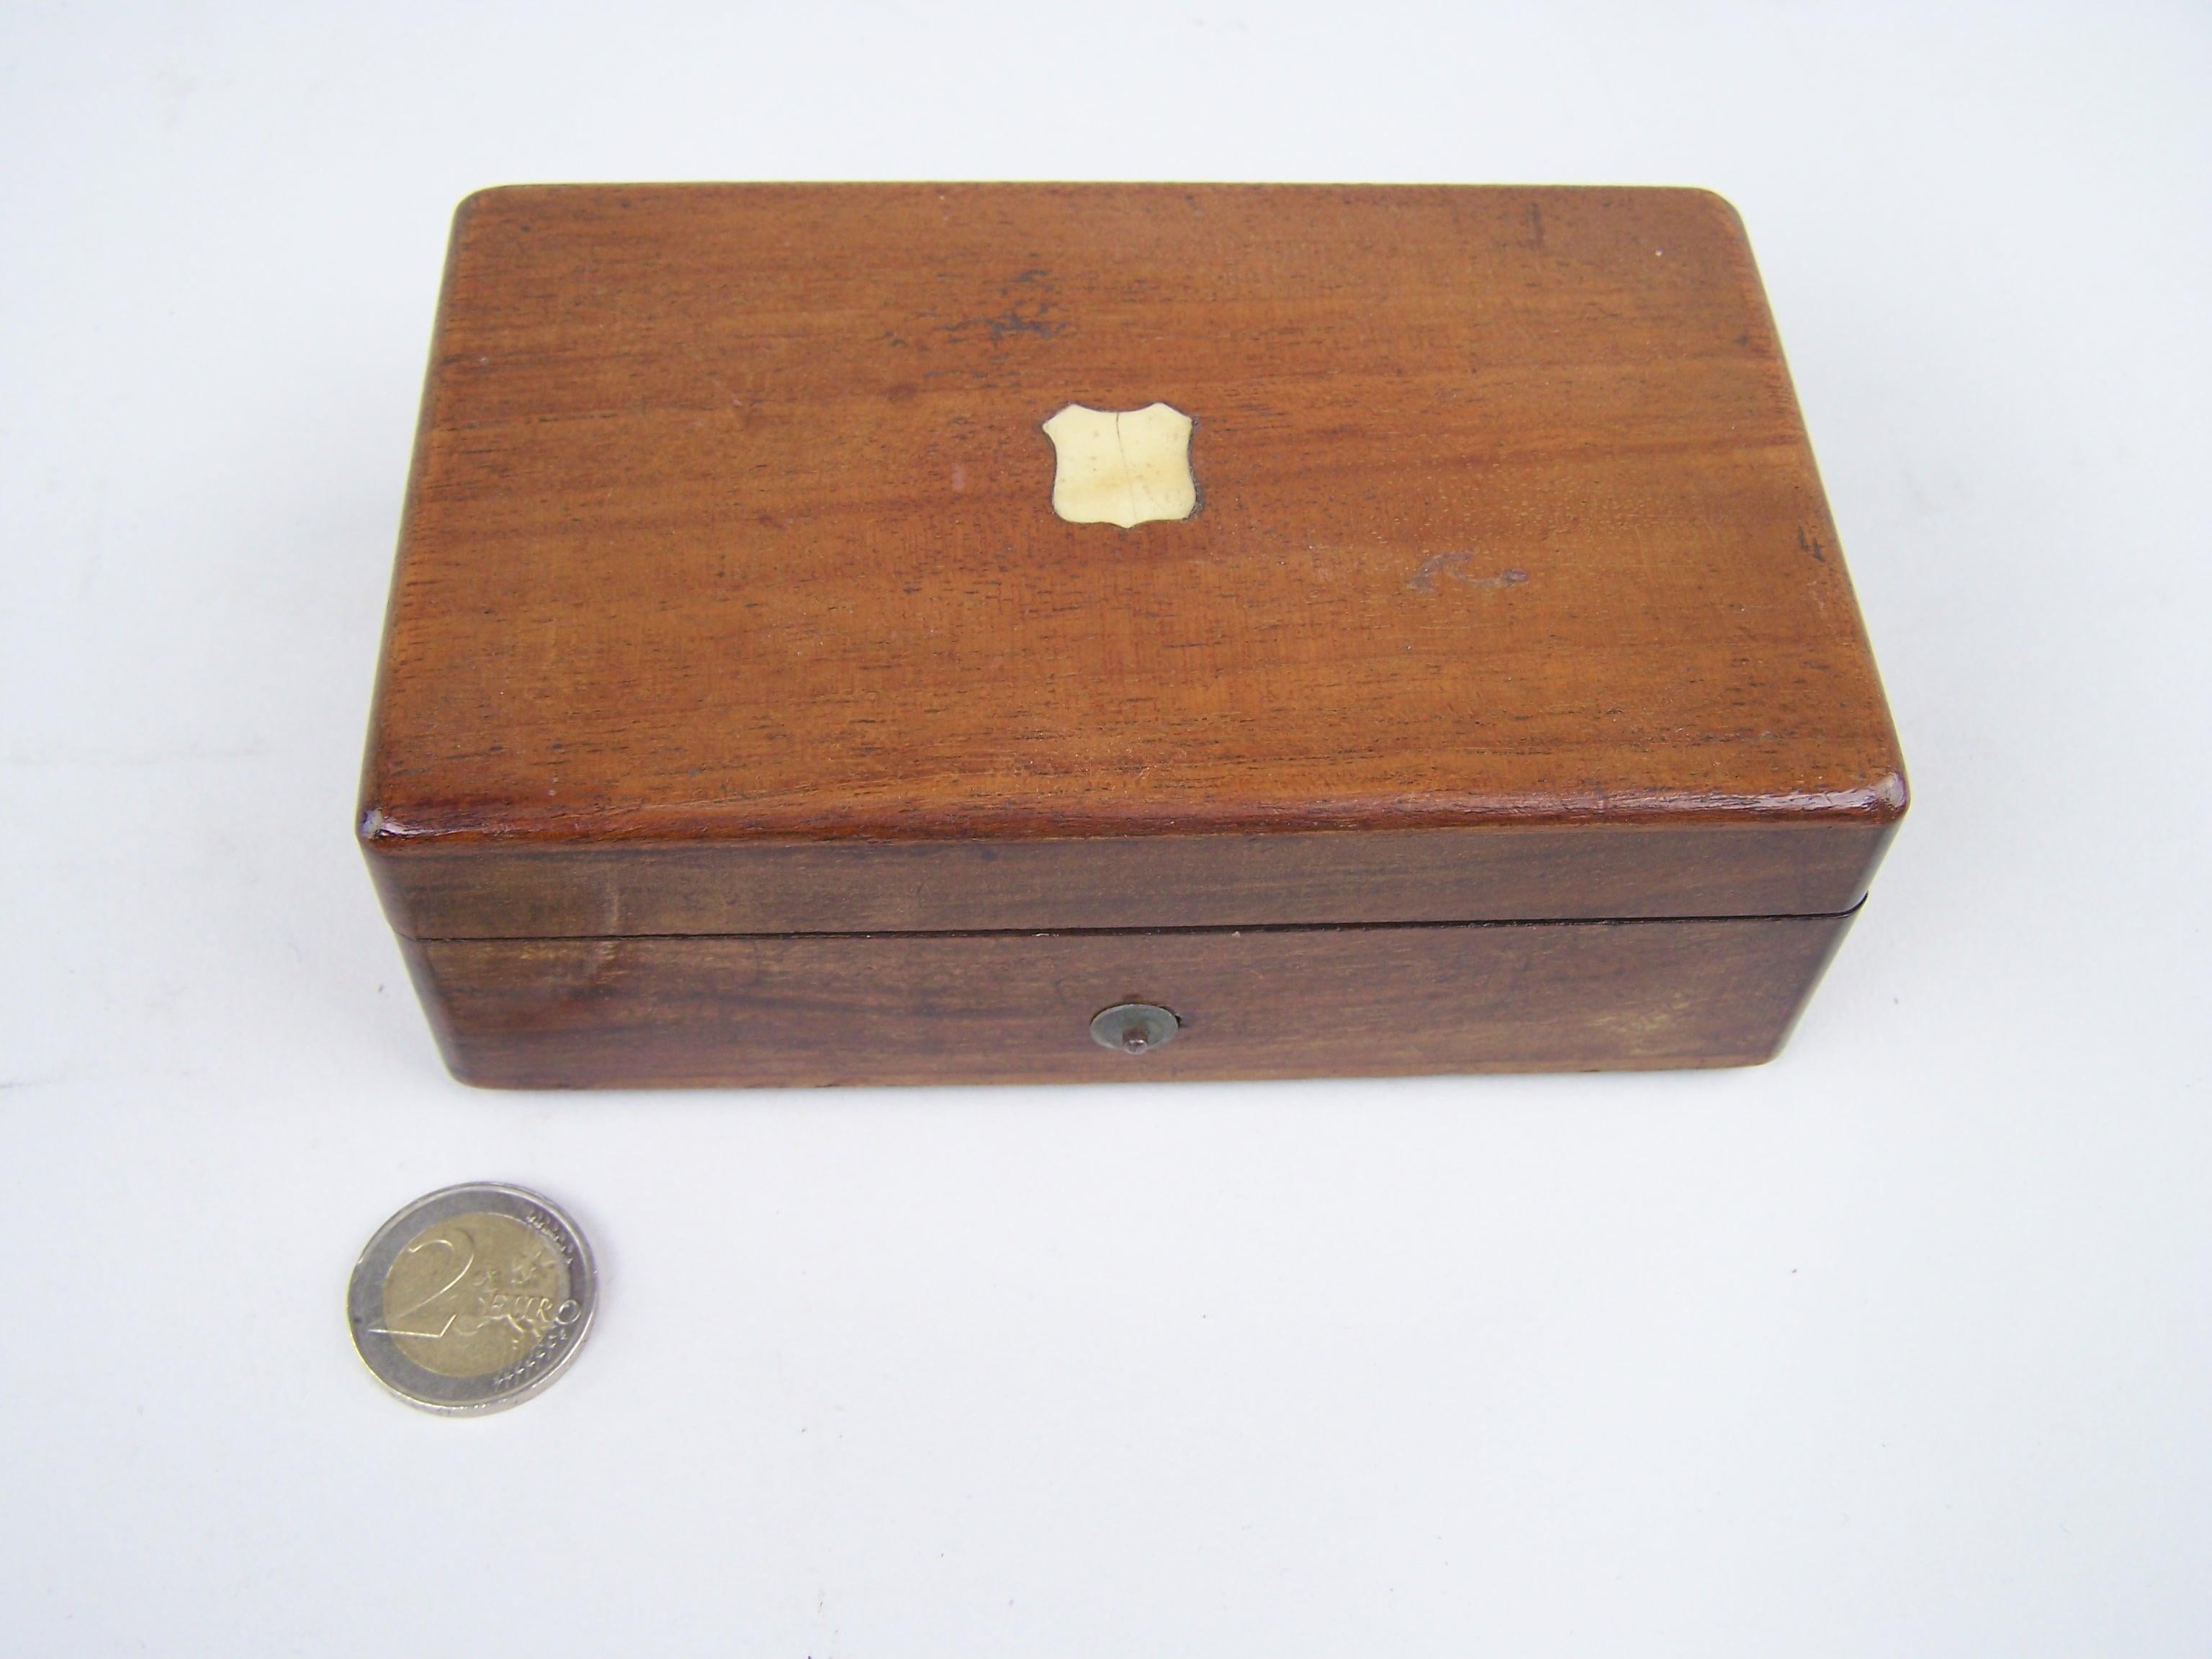 Small 3 tune mandoline music box.

The wooden case has some central inlay to the top of the lid.
The front shows the start stop lever to the right there is the change/repeat lever (disengaged). The winding is to the botom